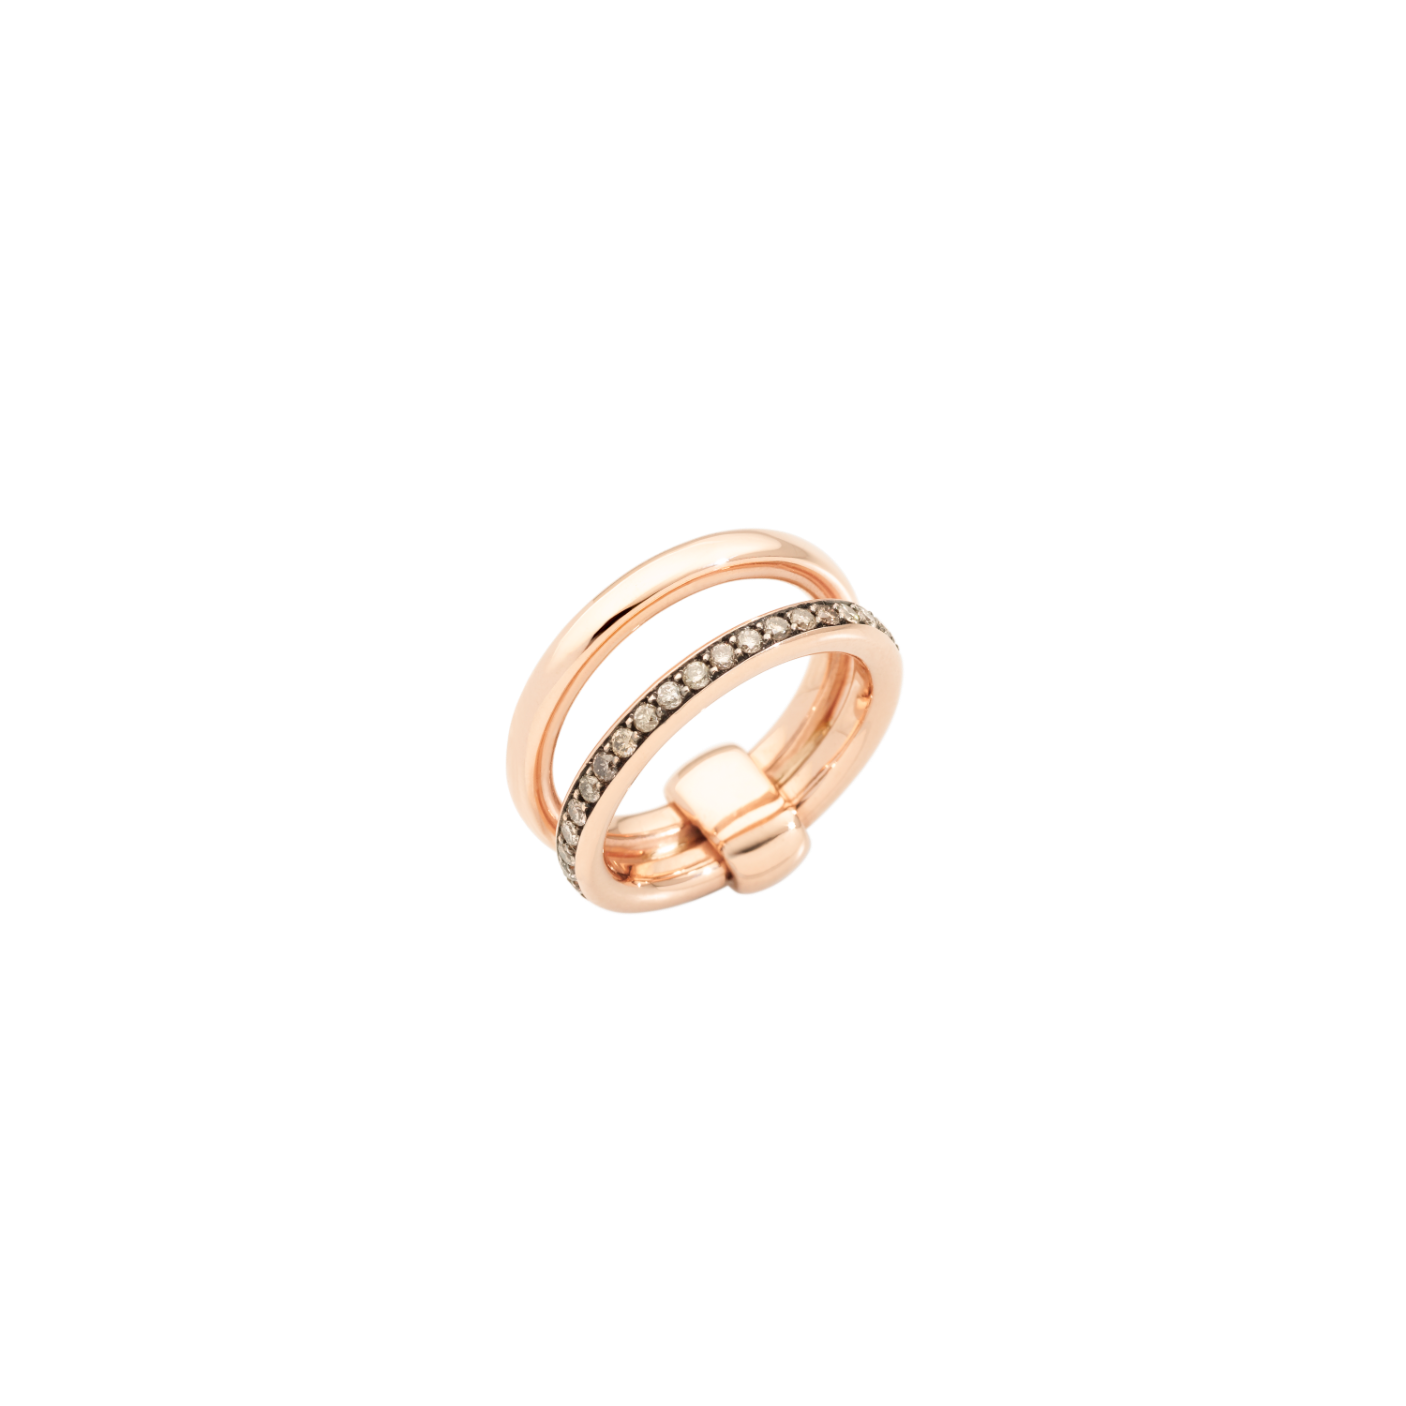 PAC0100_O7BKR_DBR00_010_Pomellato_iconica-band-ring-rose-gold-18kt-brown-diamond.png